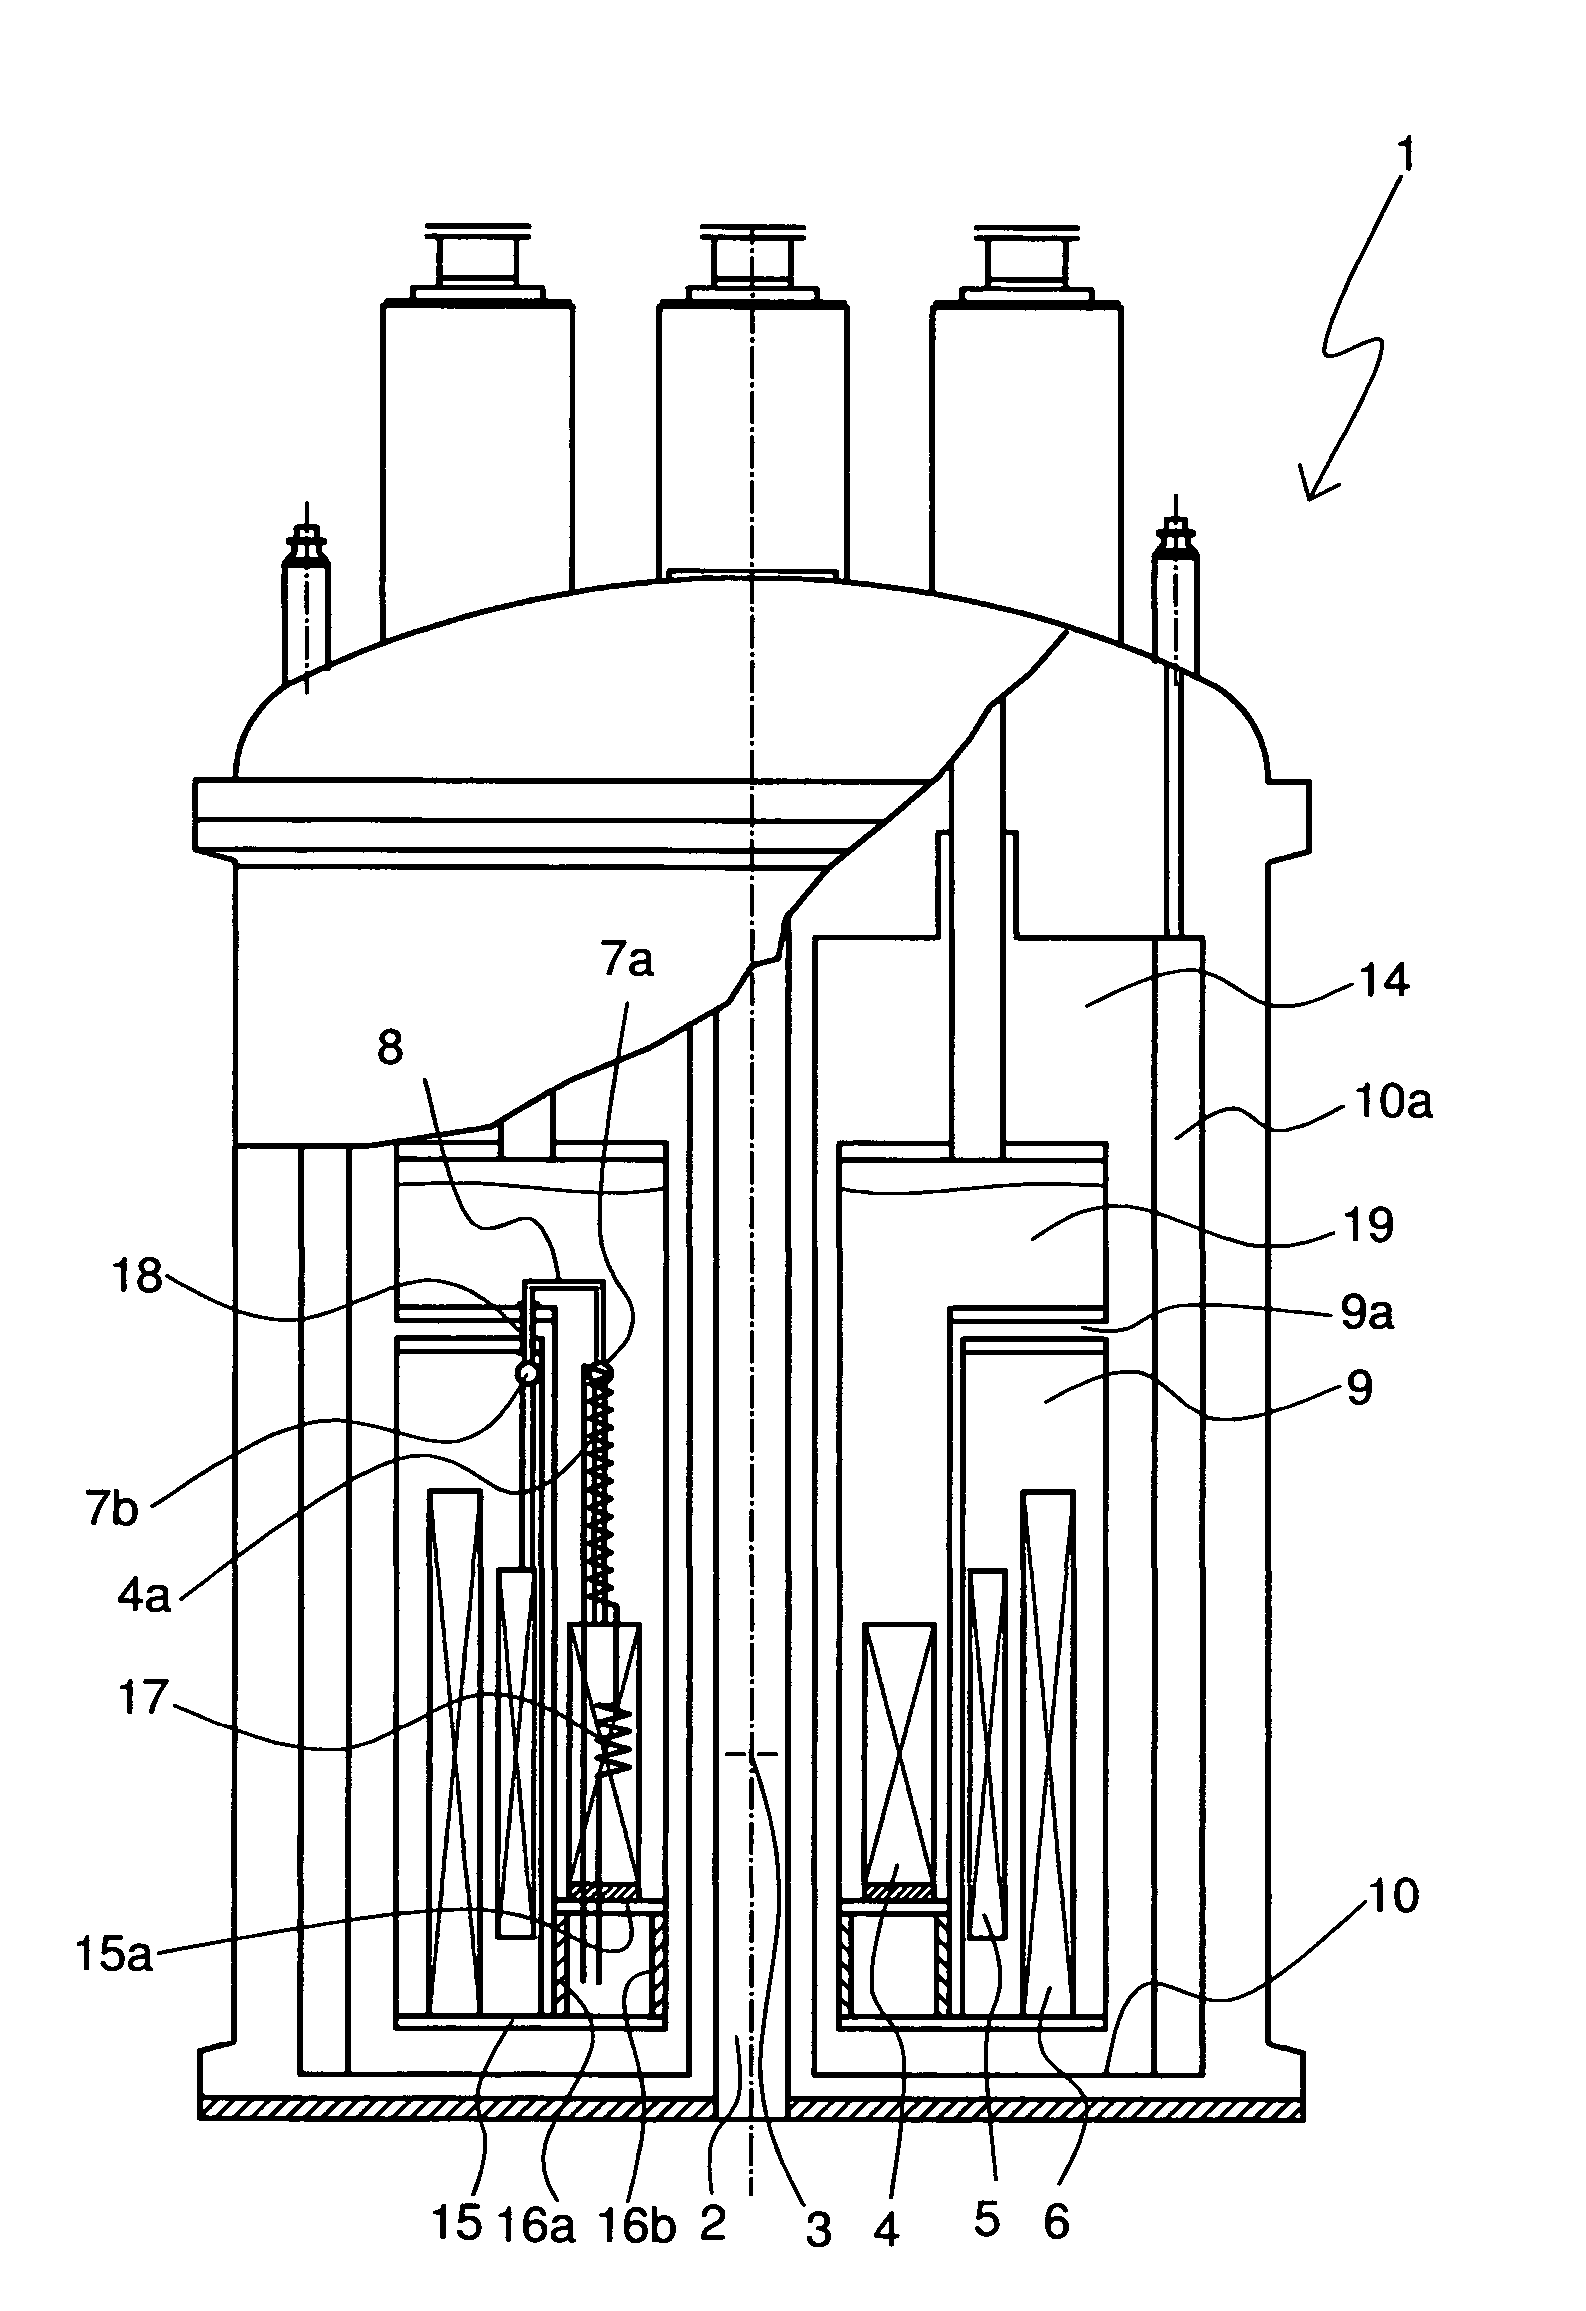 Cryostat having a magnet coil system, which comprises an under-cooled LTS section and an HTS section arranged in a separate helium tank